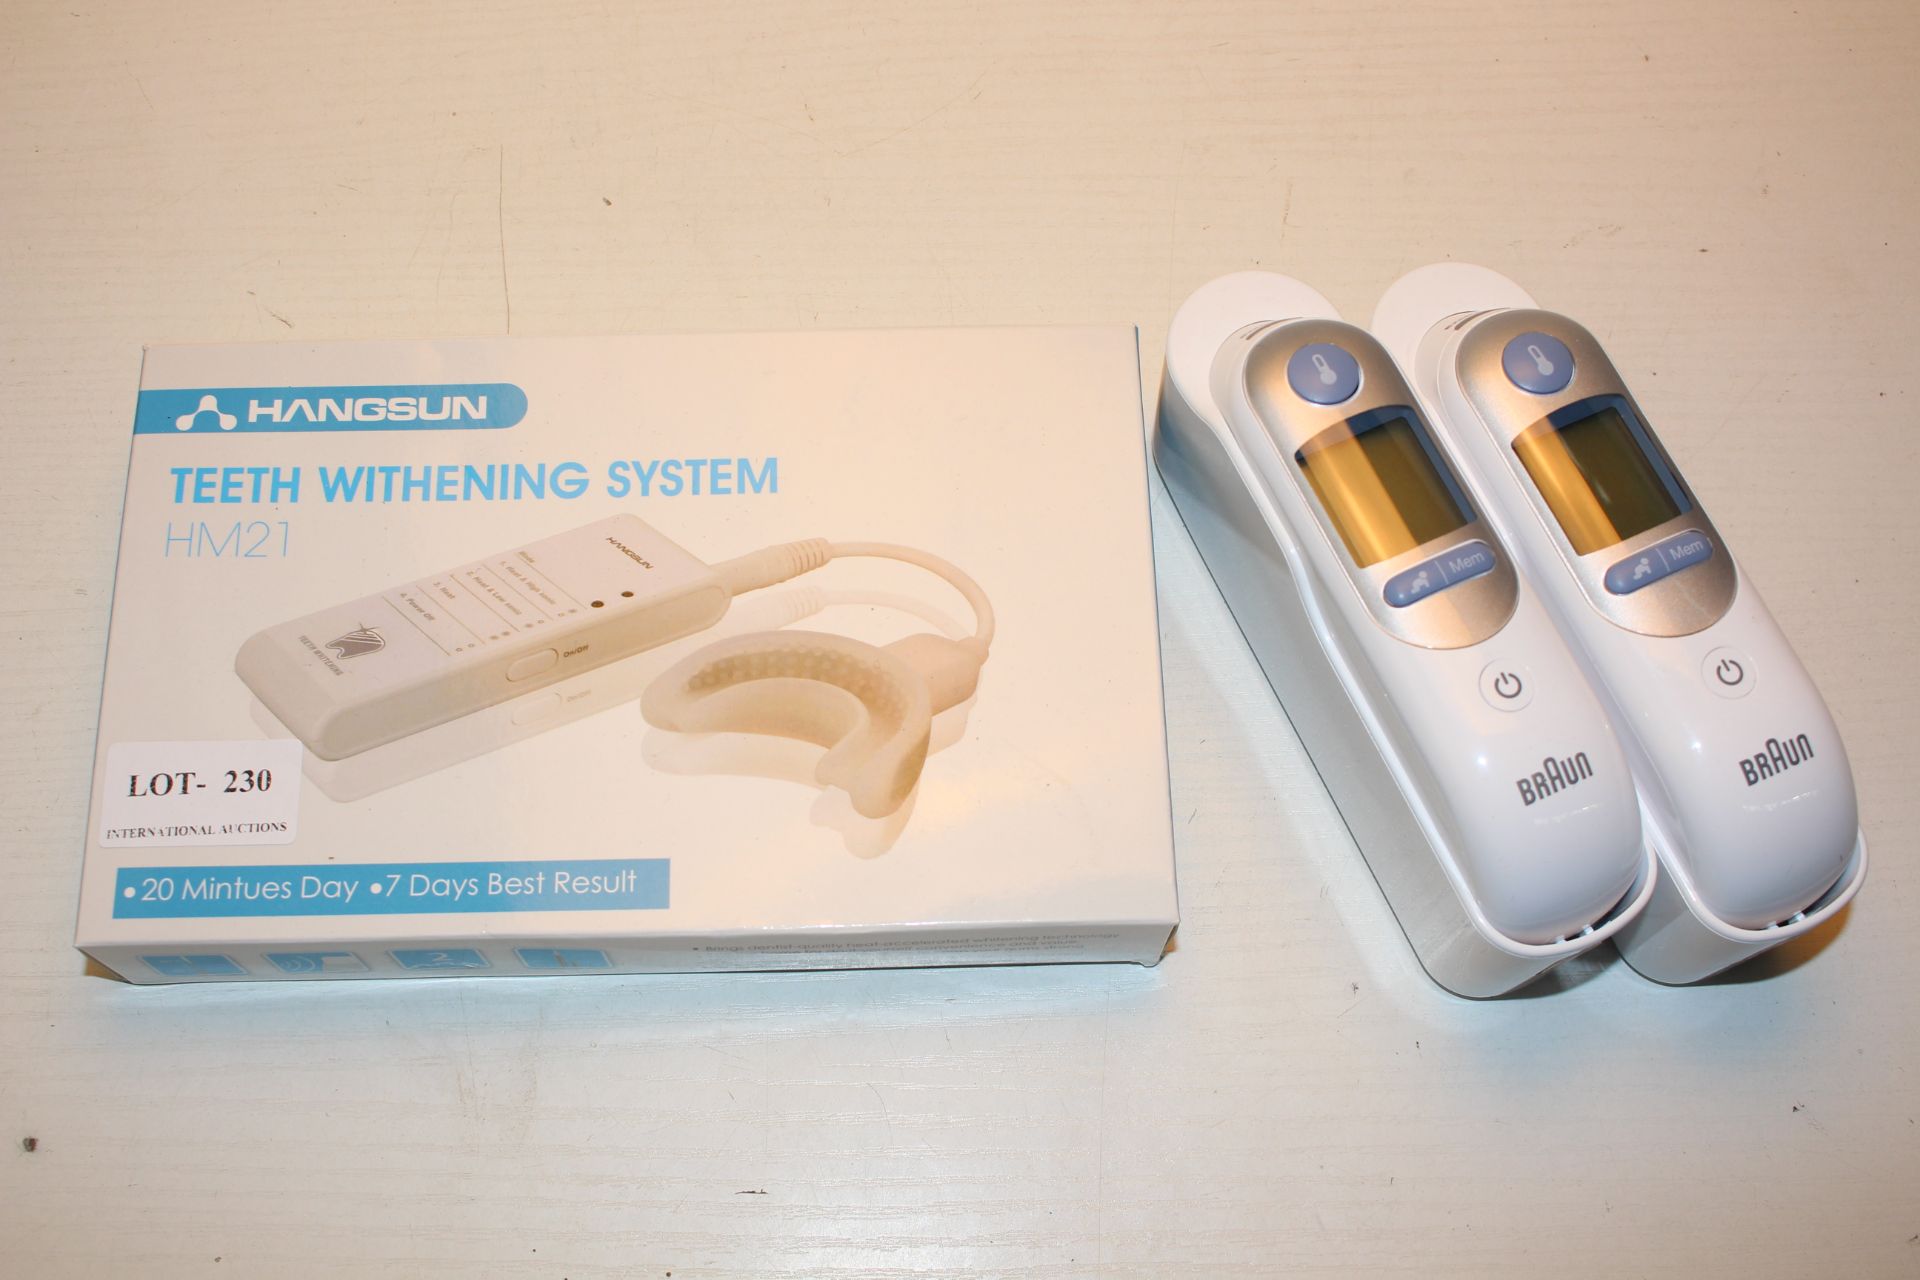 3X BOXED ASSORTED ITEMS TO INCLUDE HANGSUN TOOTH WHITENER HM21 & BRAUN THERMOMETERS (IMAGE DEPICTS